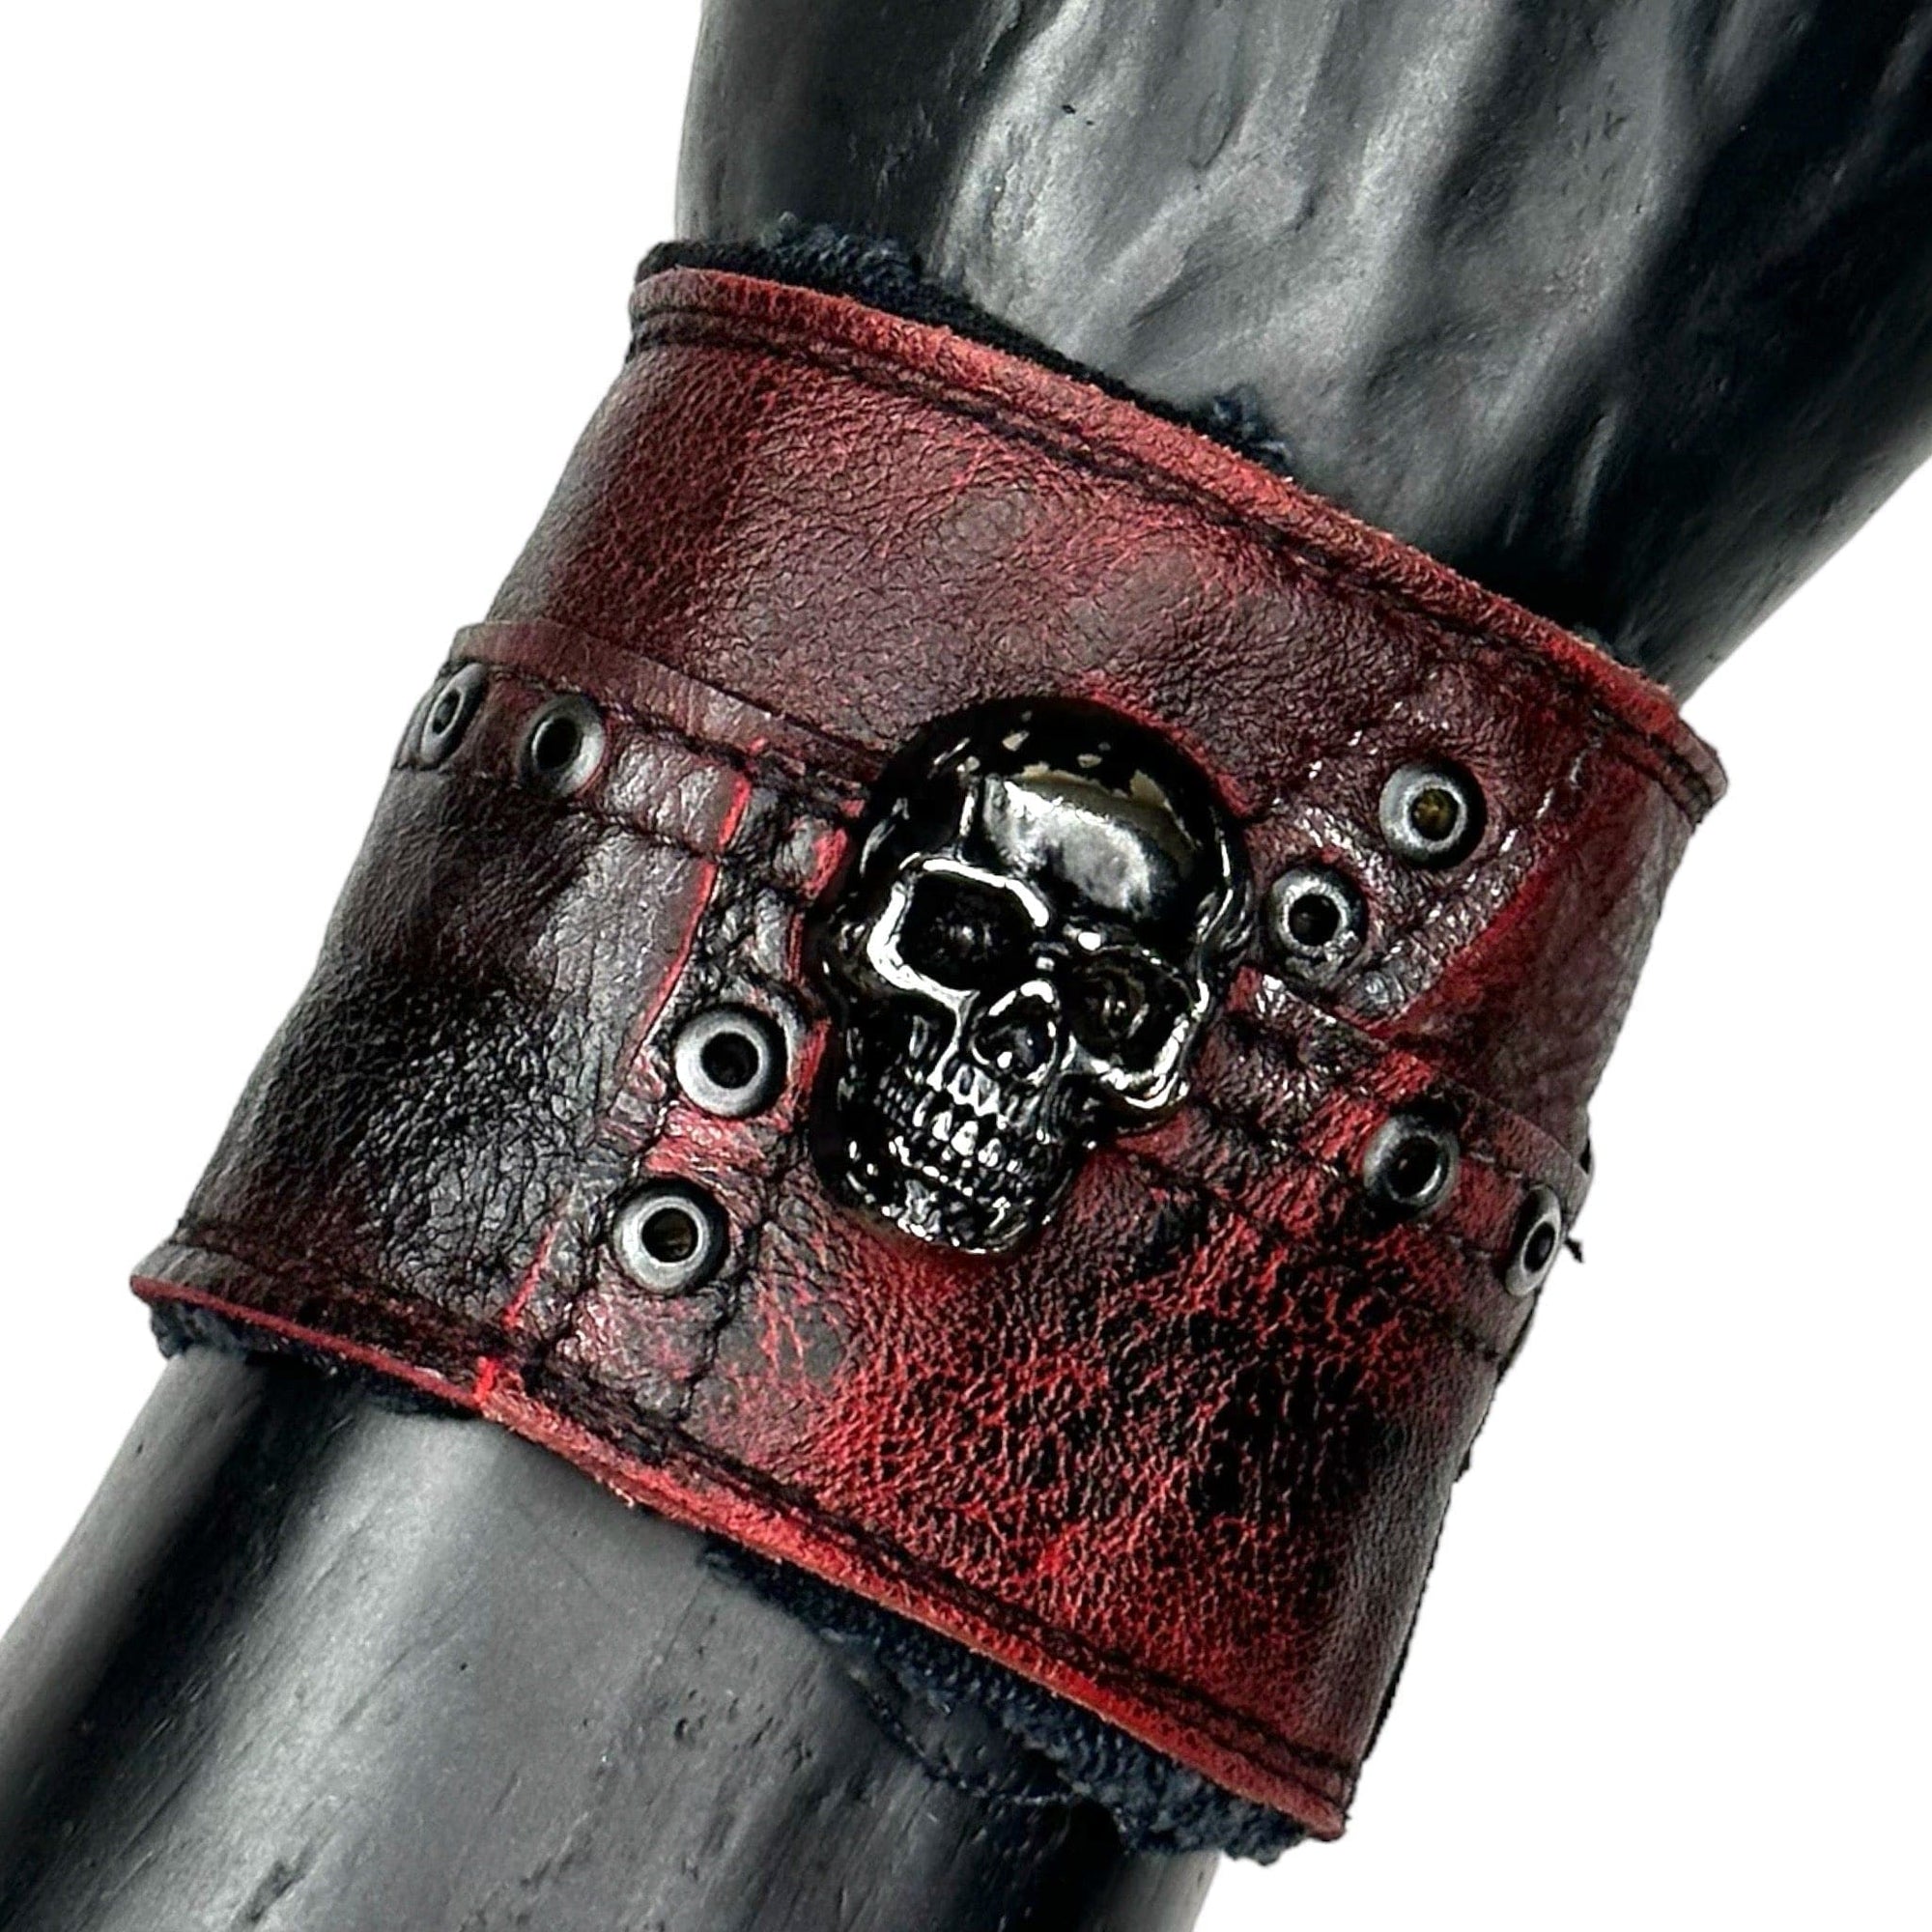 • Wornstar Custom Salvaged Collection• Ready to ship - Custom leather wrist band• One of a kind• Designed, made, and sold exclusively by Wornstar Clothing• Completely hand-made• Individually made; each one will vary slightly• Made with soft leather• Lined for comfort• Hand-made detail with metal, skull accent• 